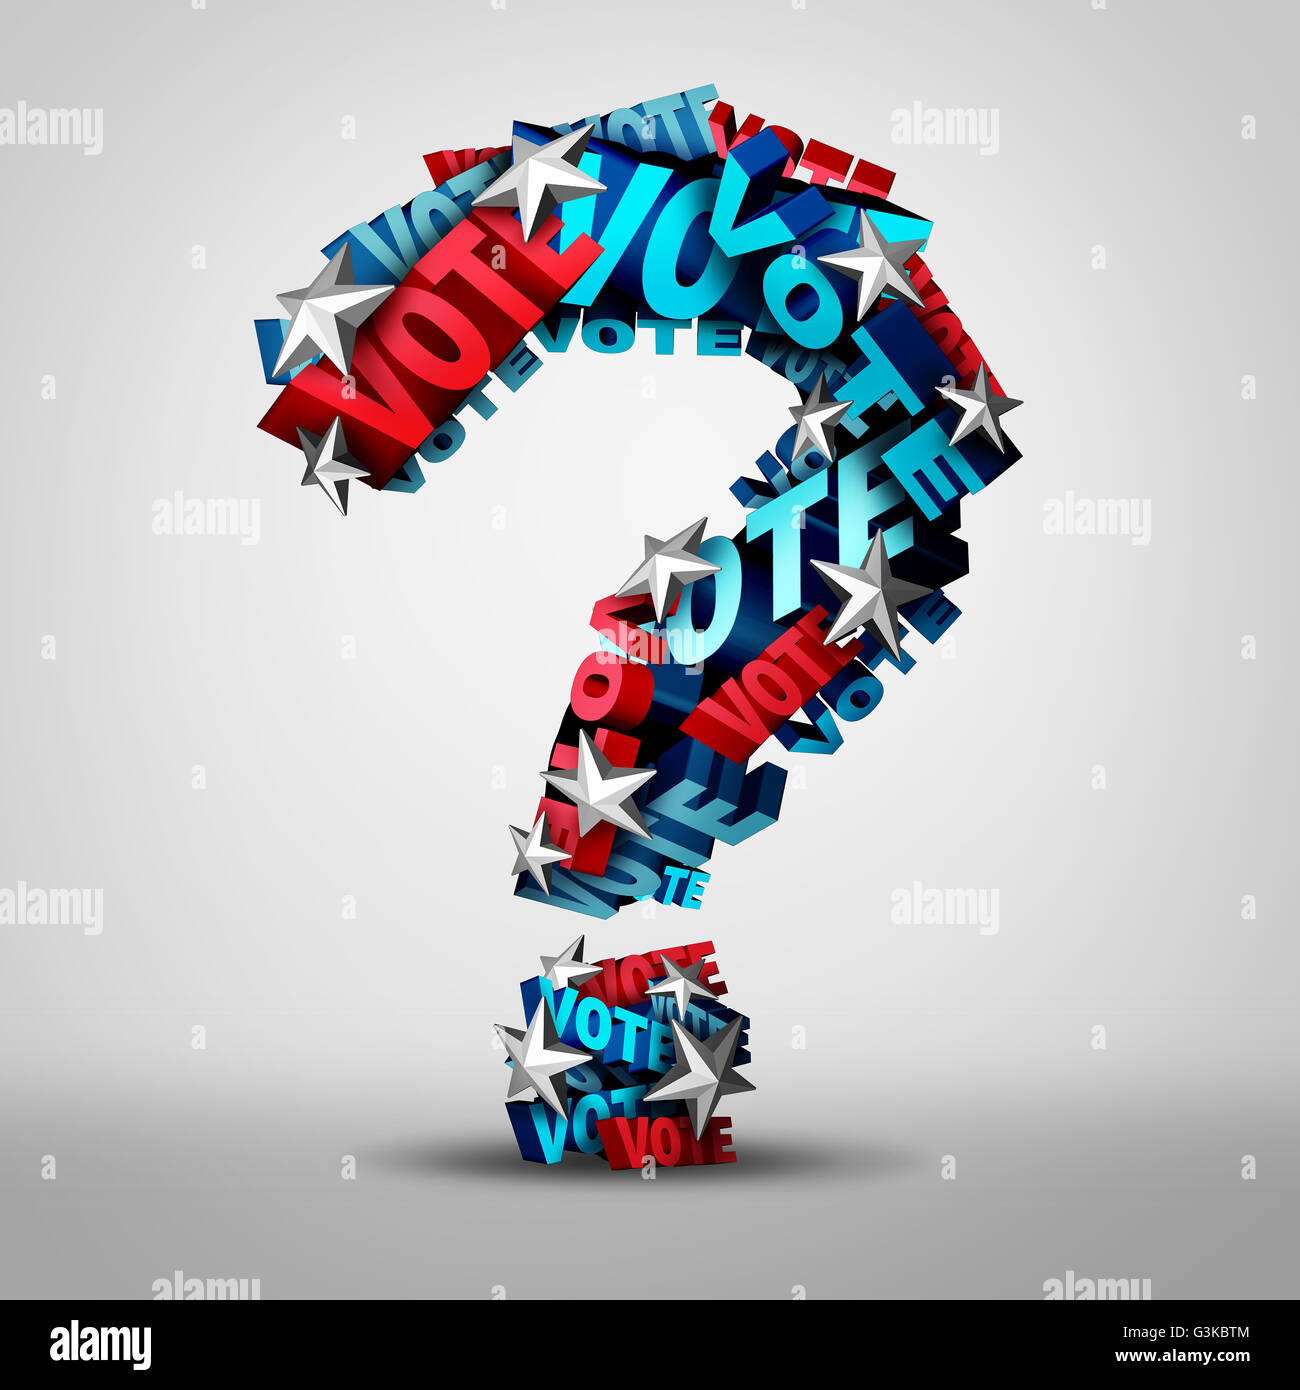 Vote question symbol as a group of 3D illustration text and stars shaped as a voting and voter question mark as an icon Stock Photo